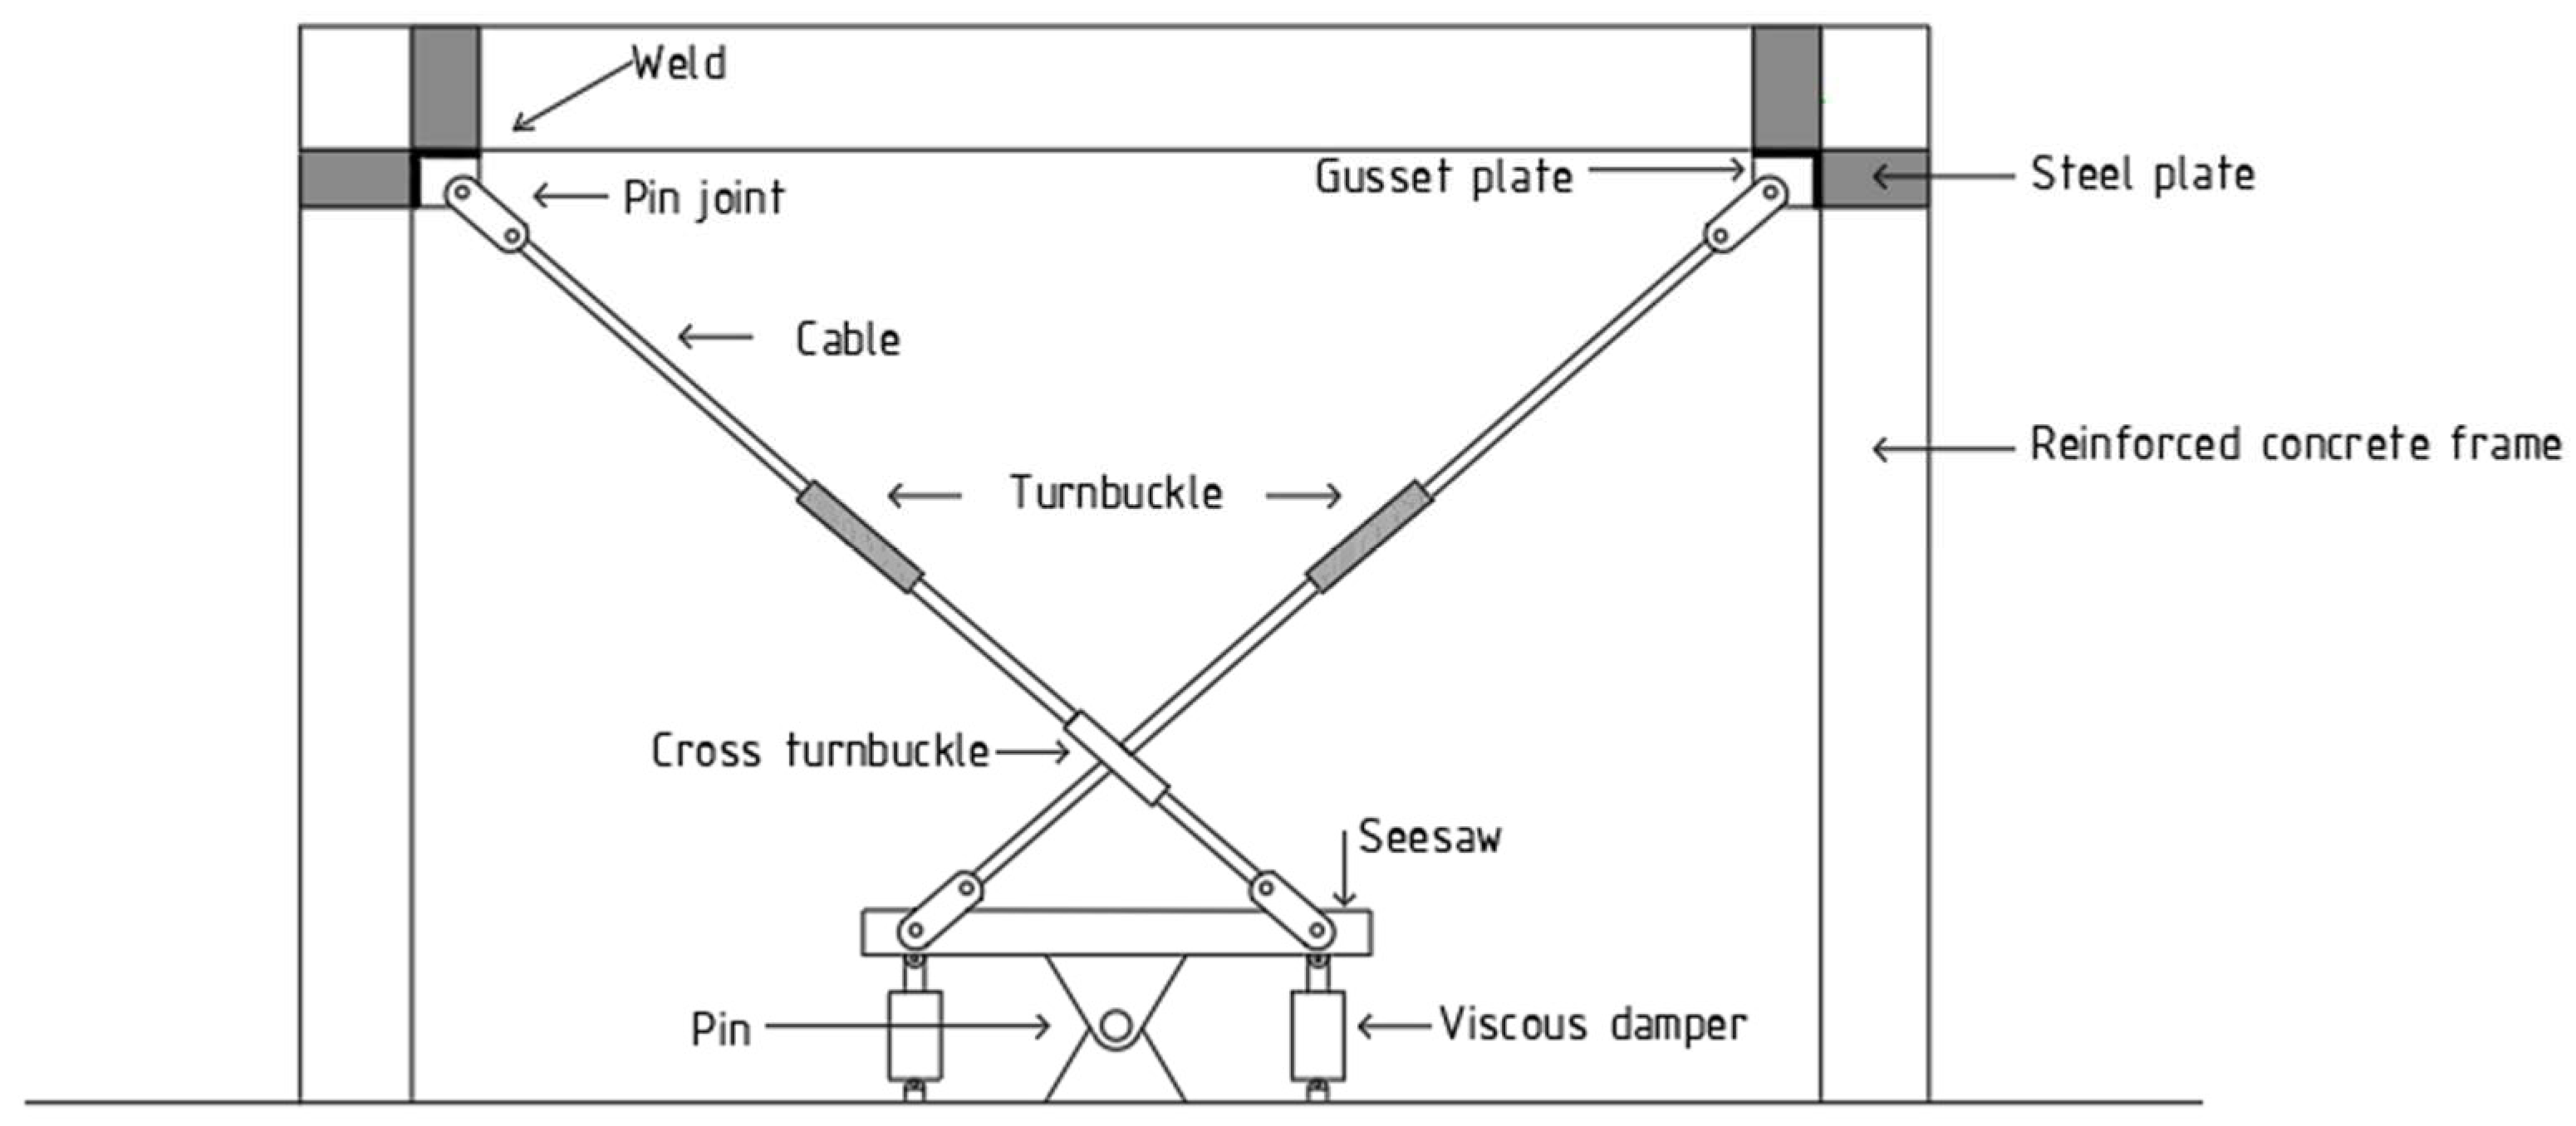 steel frame gusset plate connection